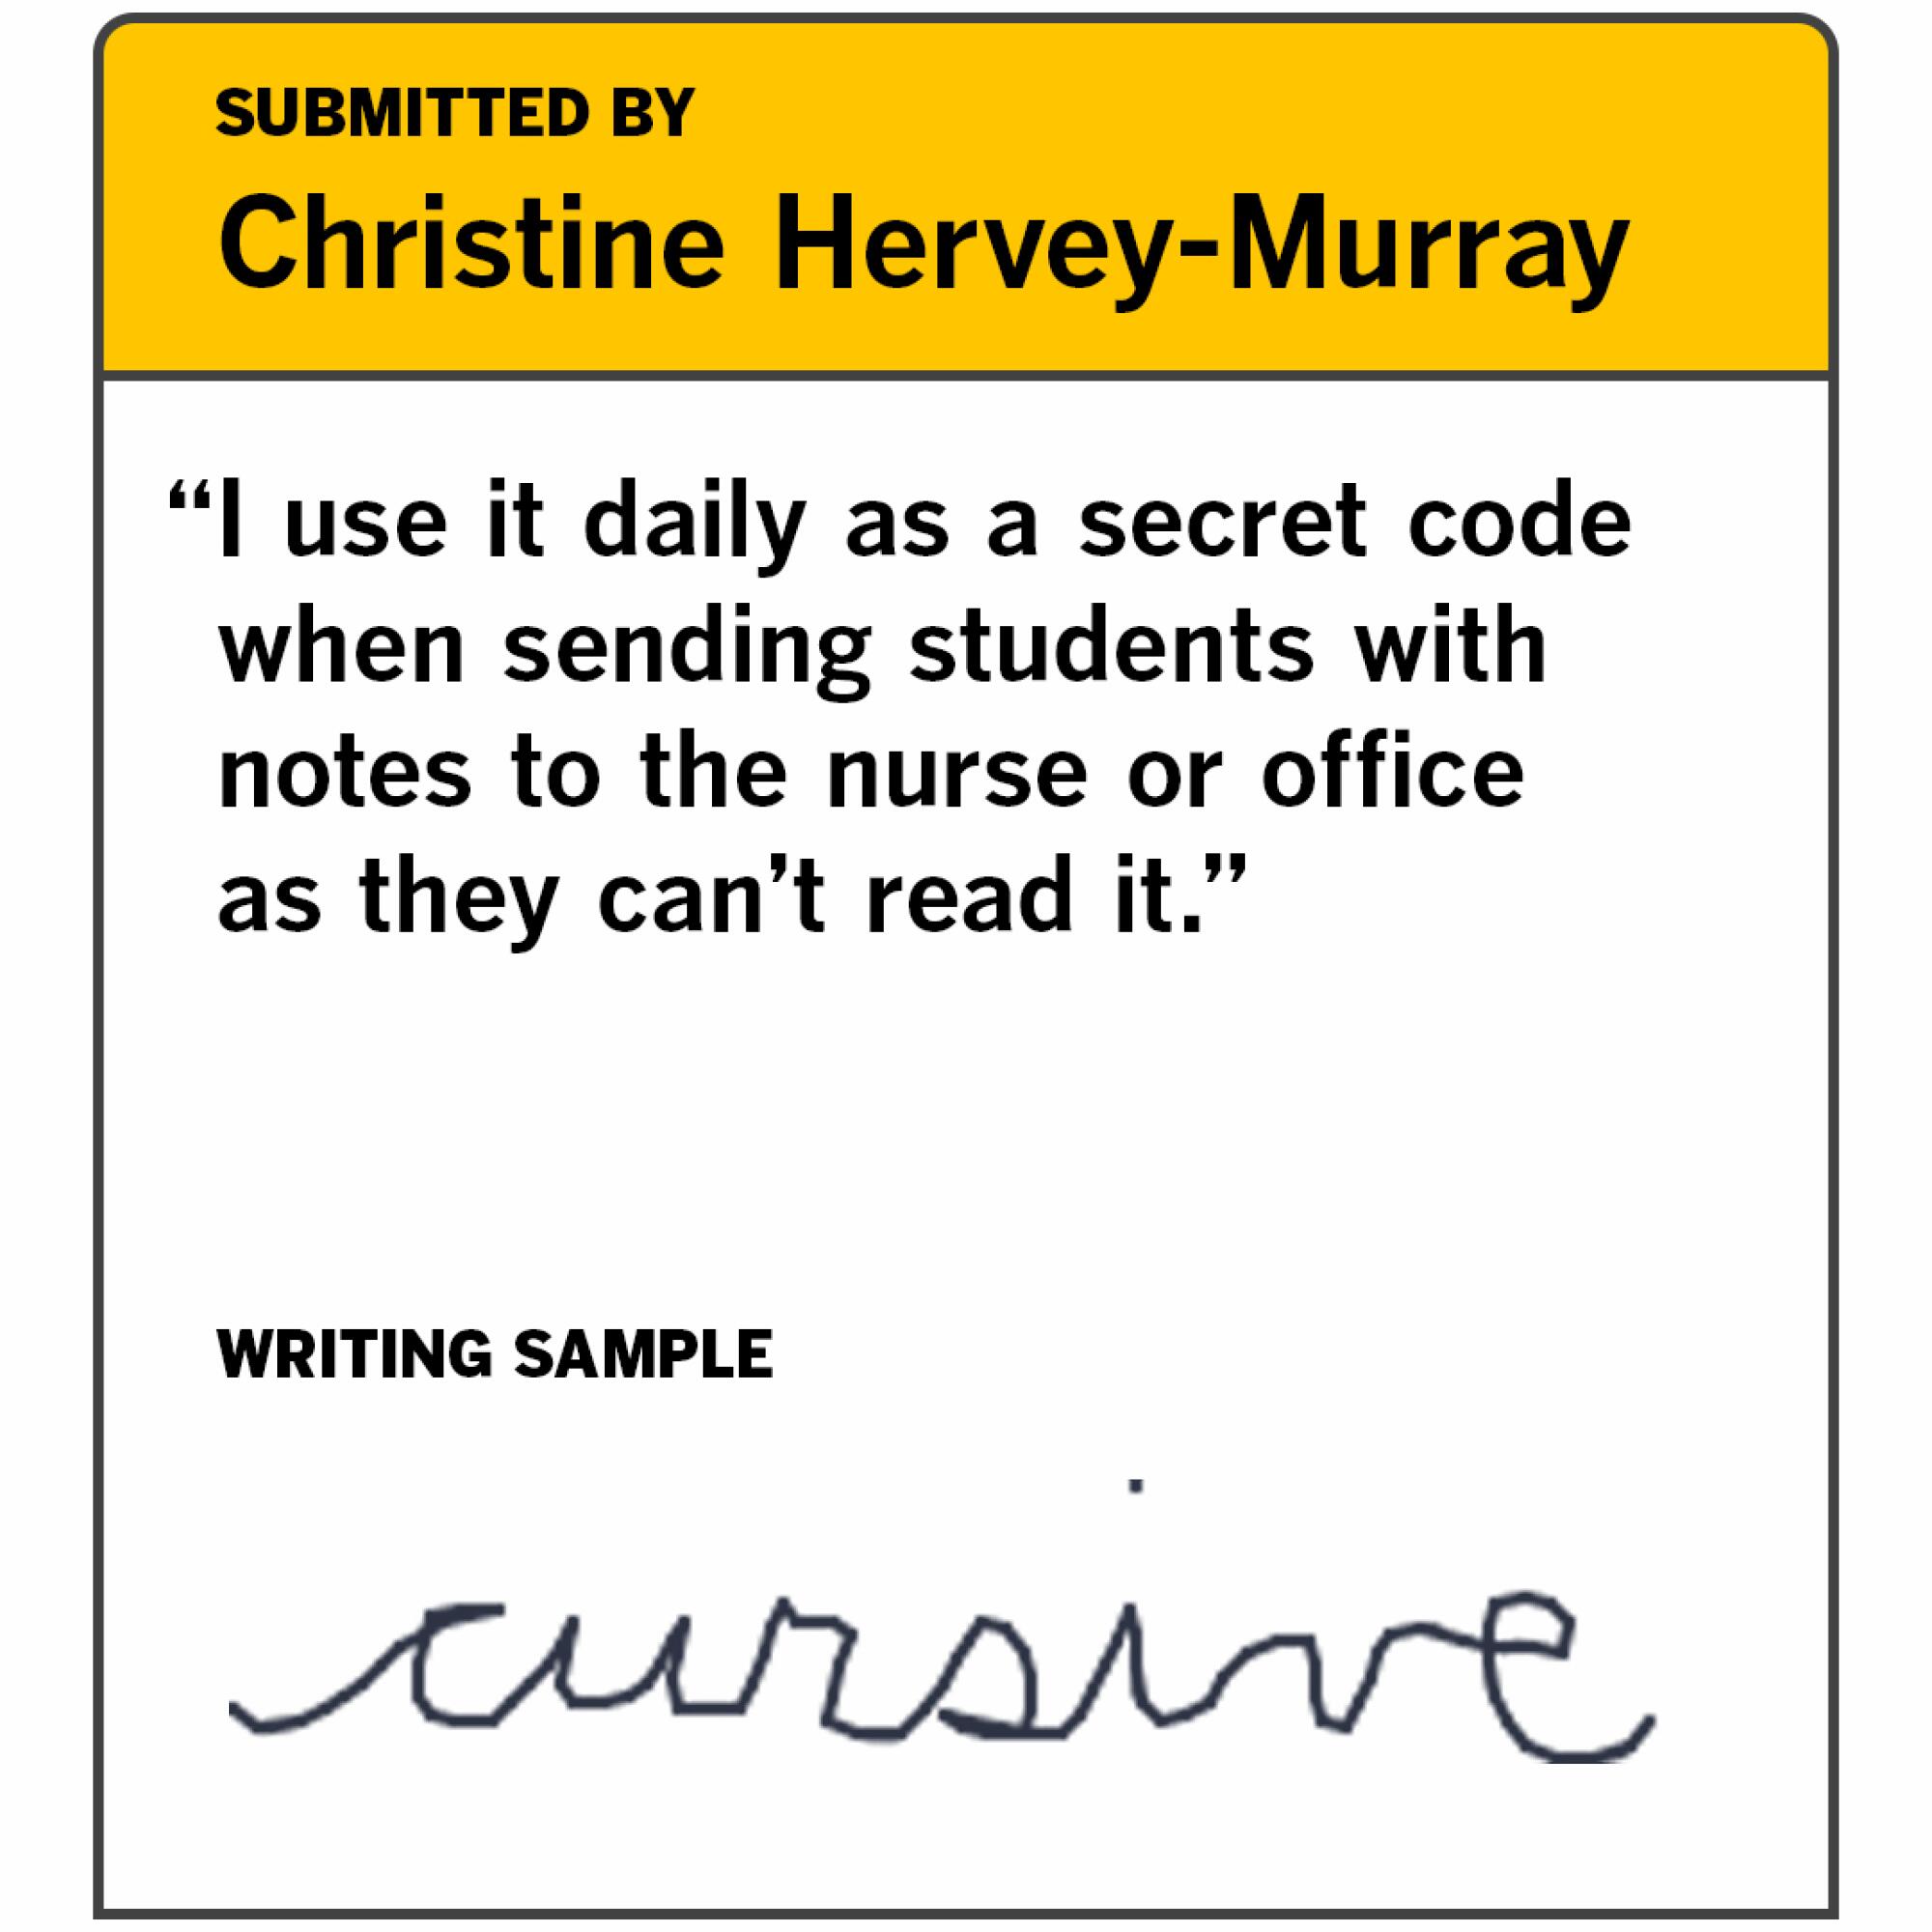 Cursive writing example from Christine Hervey-Murray